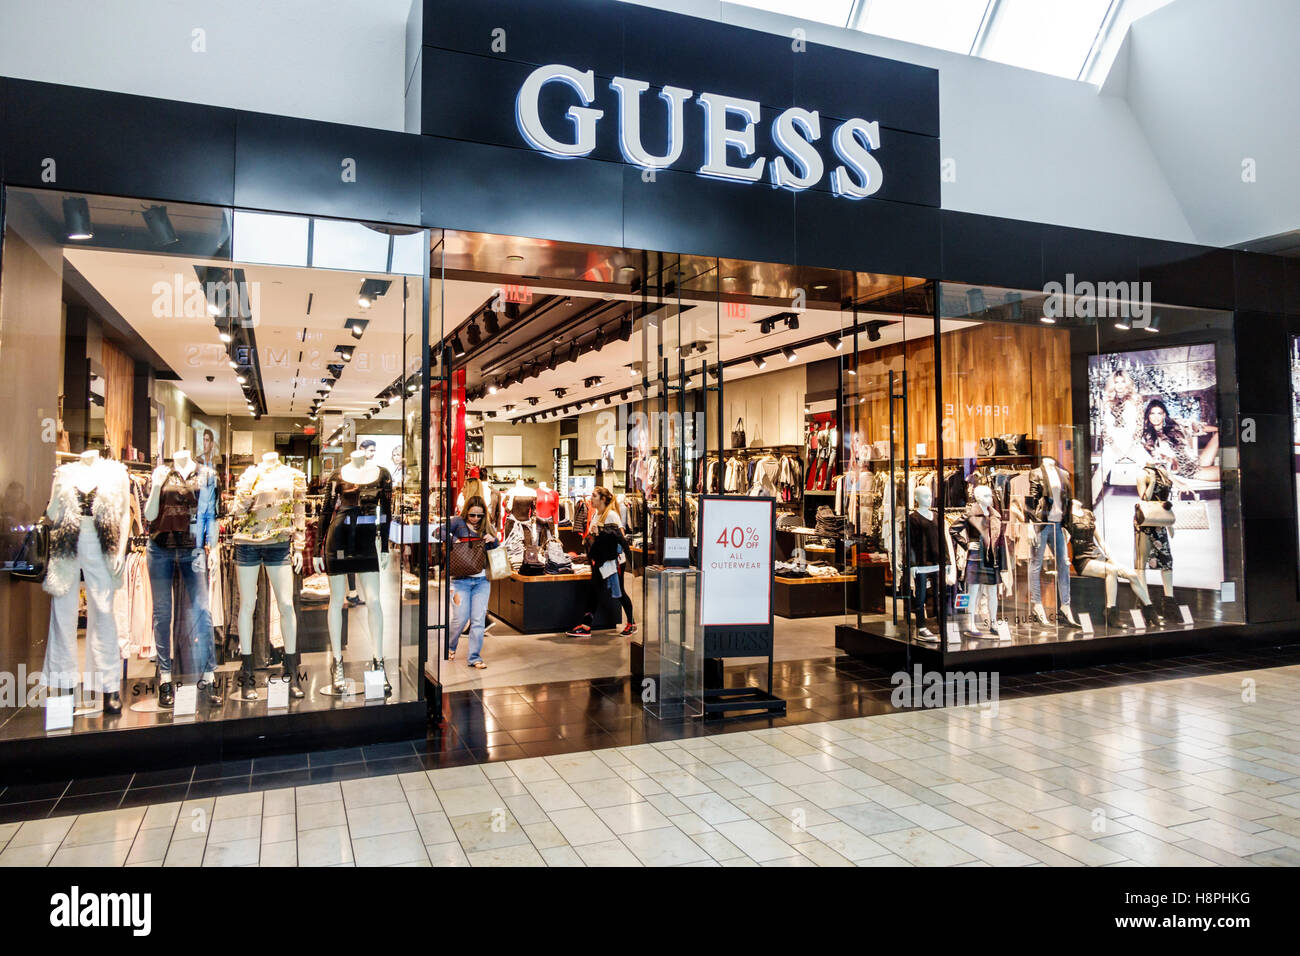 Miami Florida,International mall,Guess,front,entrance,women's,clothing ...